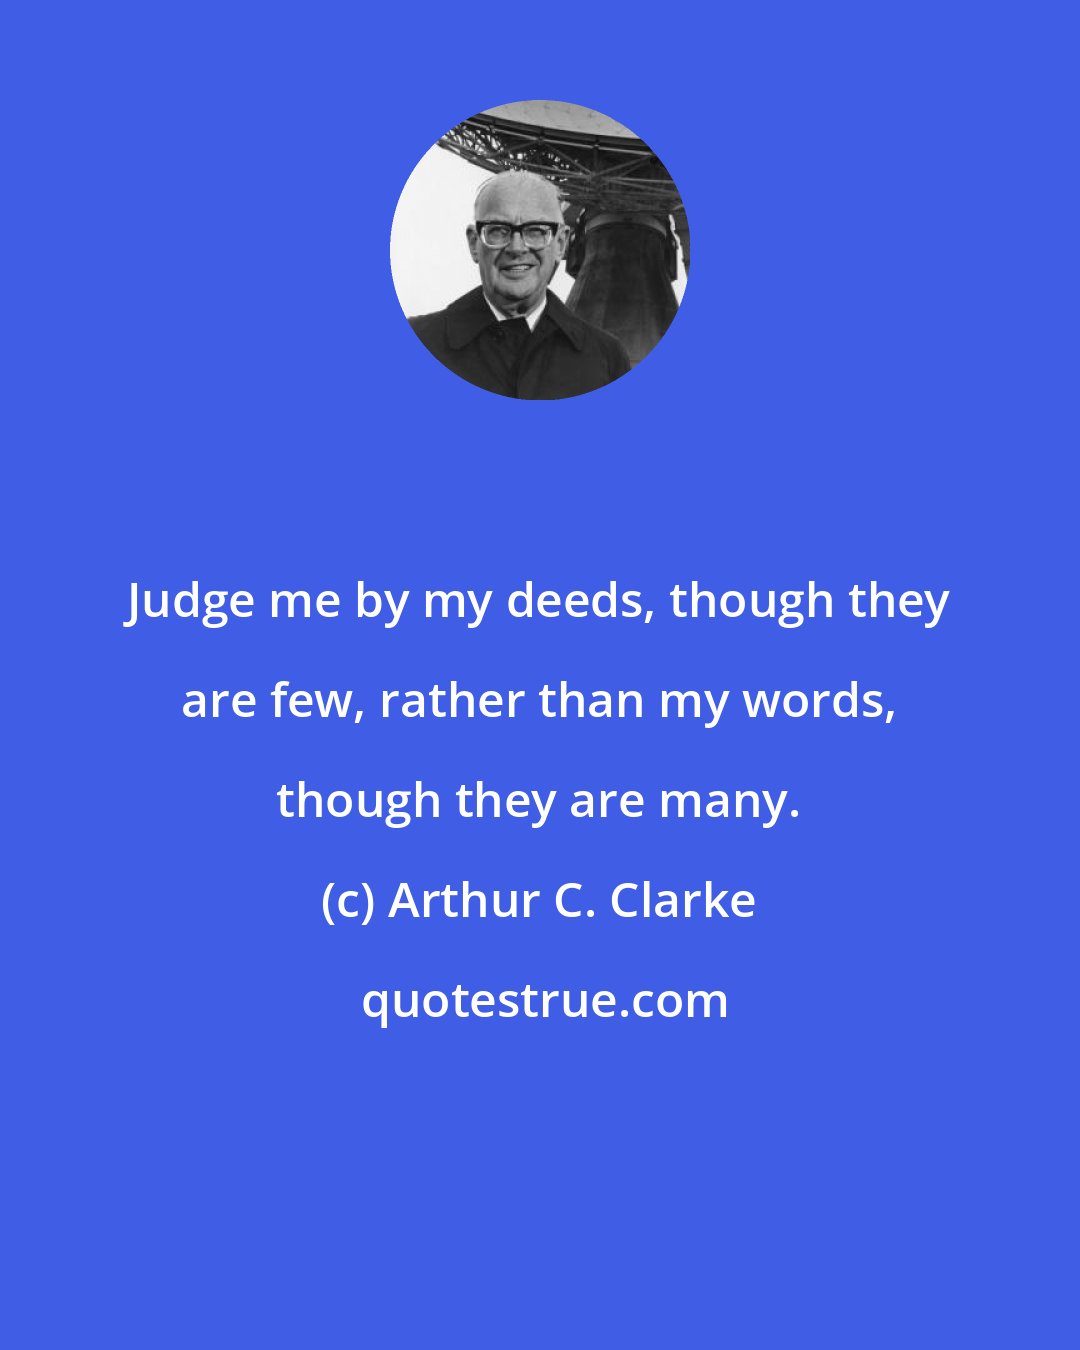 Arthur C. Clarke: Judge me by my deeds, though they are few, rather than my words, though they are many.